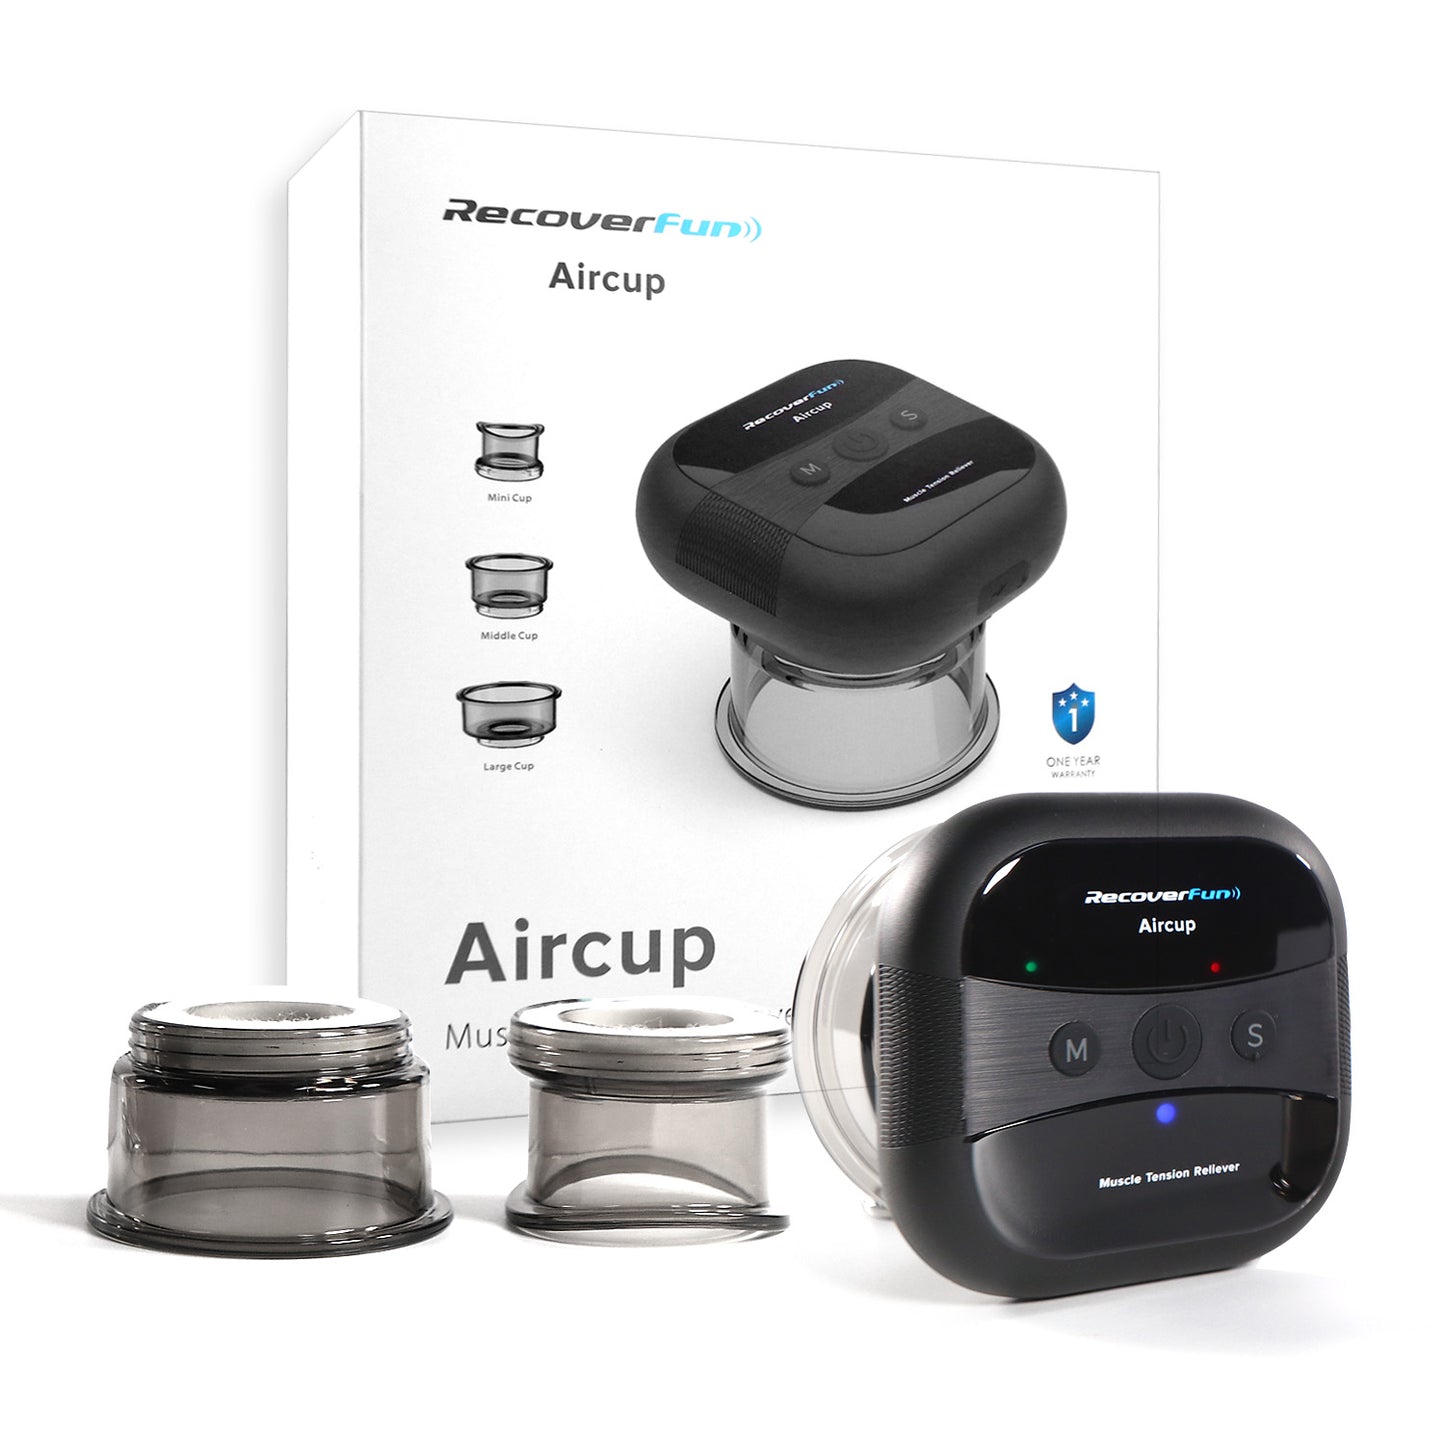 Recoverfun Aircup cupping therapy